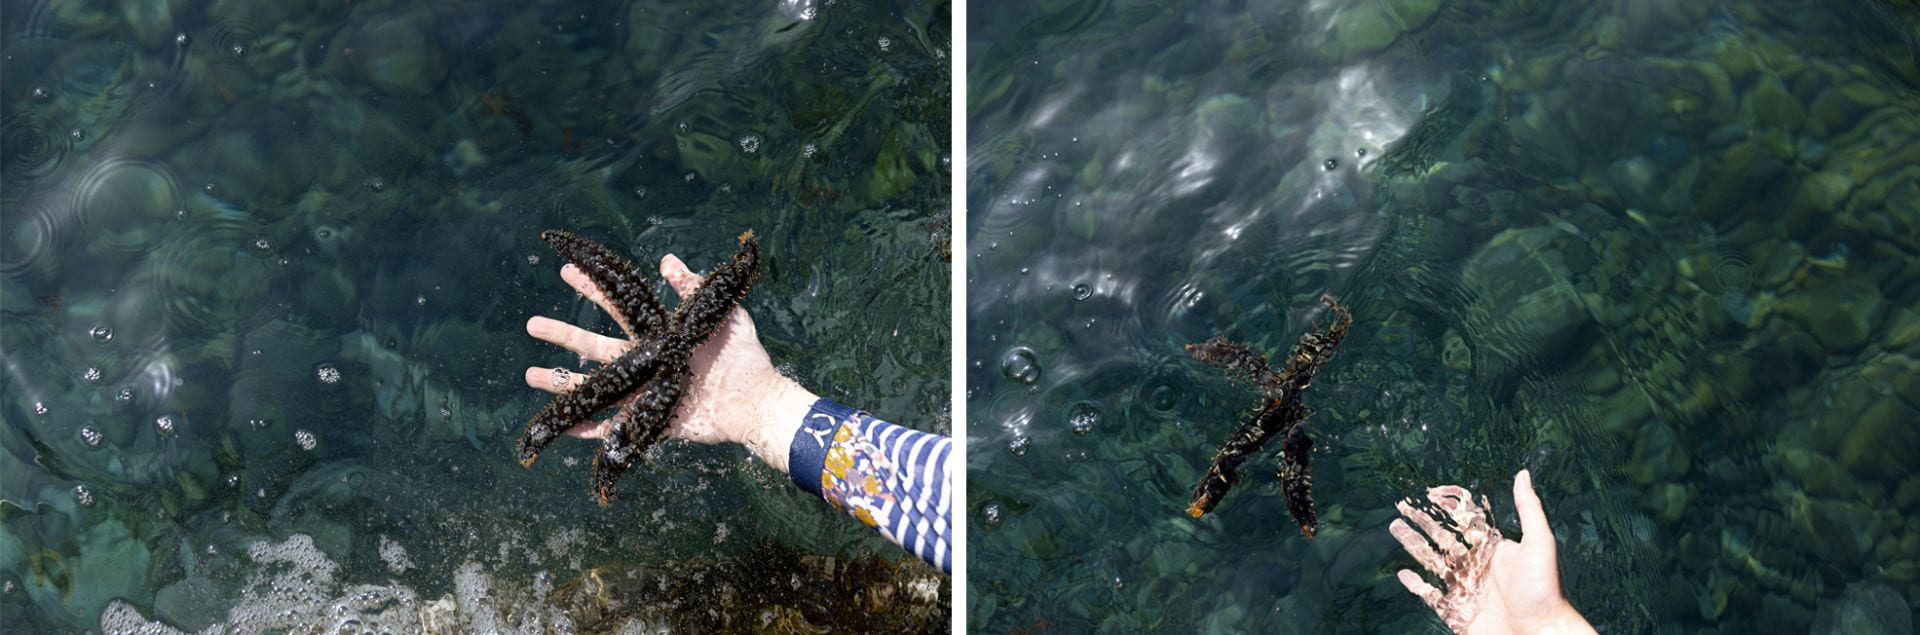 Letting go of the seastar into the water.